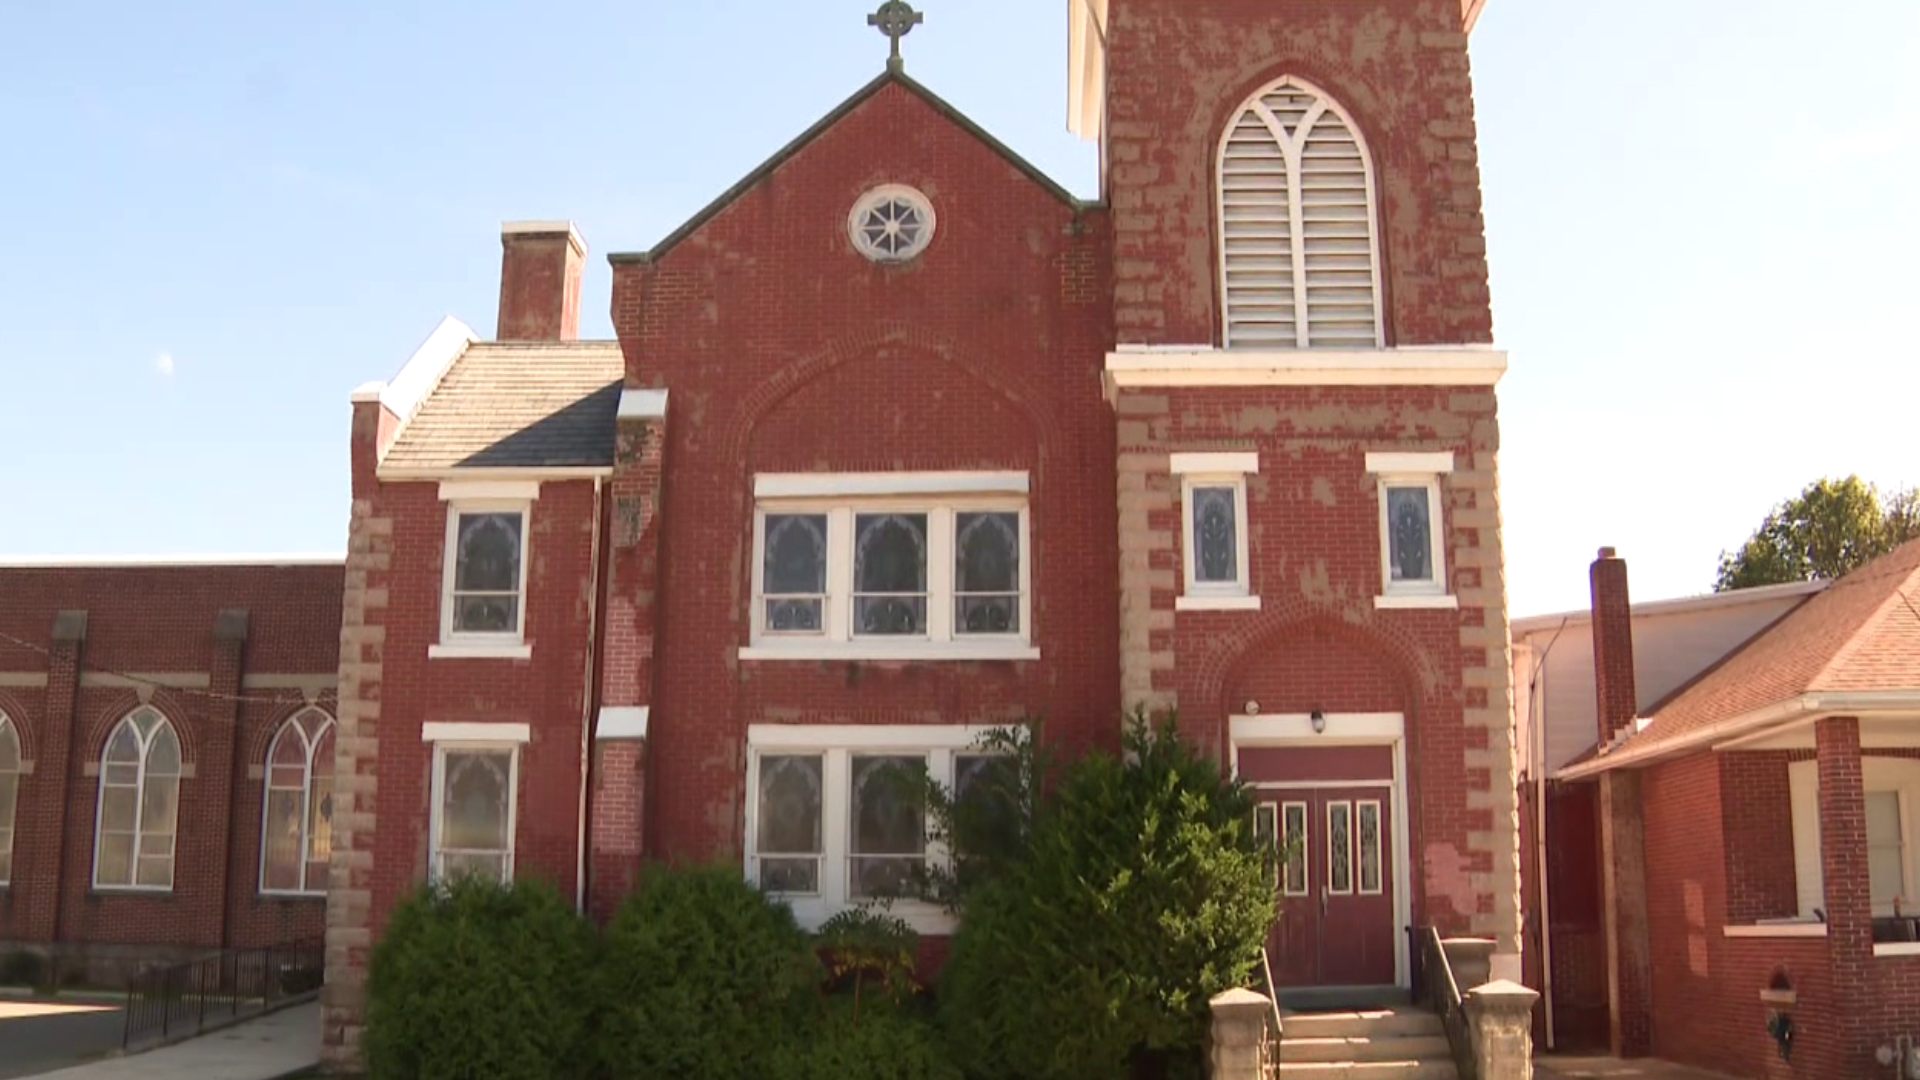 Grace Lutheran Church has been a landmark in Lehighton for more than a century, but low attendance is forcing the house of worship to close.